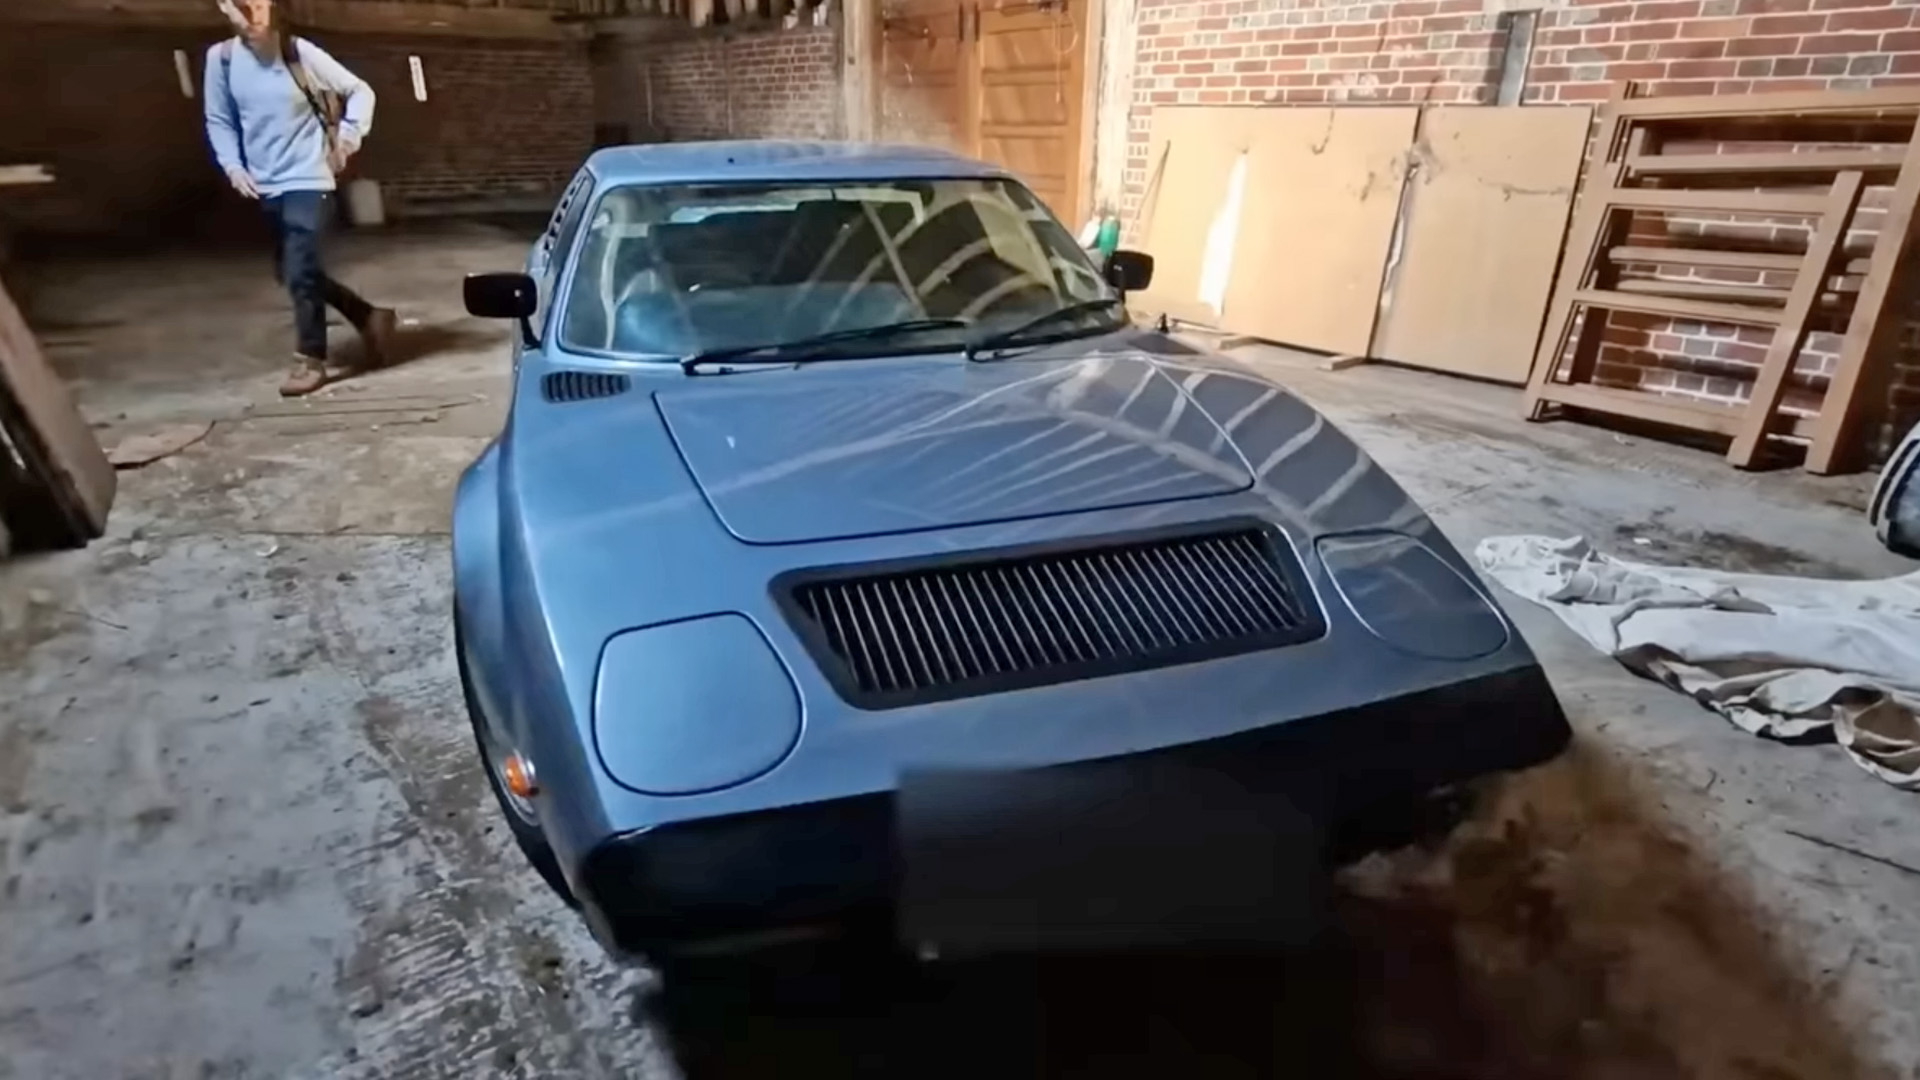 Rare AC Sports Car With Incredible Story Discovered in Abandoned British Mansion